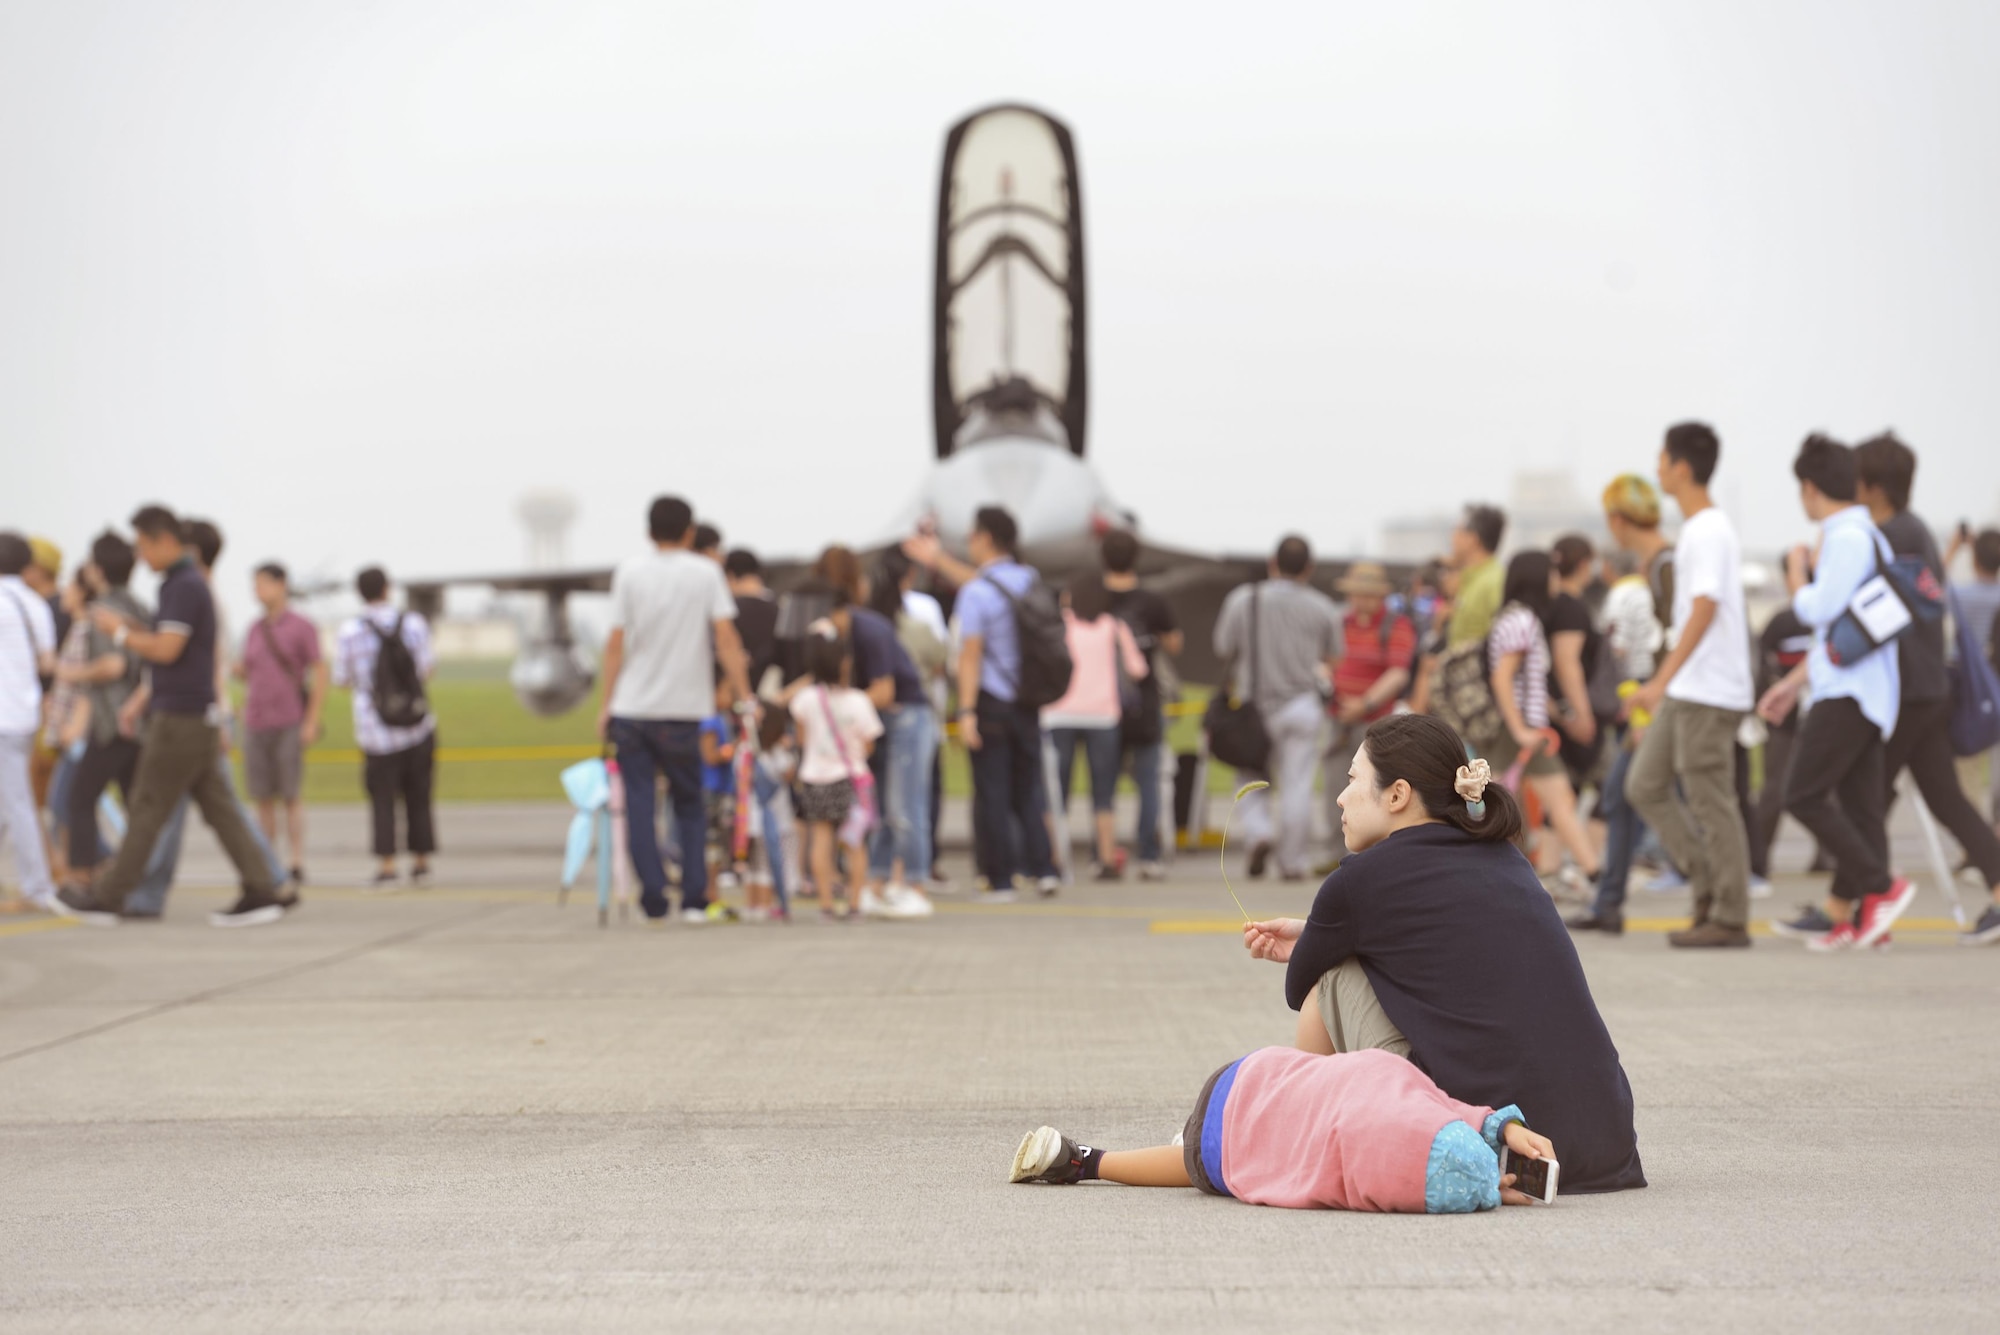 Festivalgoers relax and explore the flight line during the 2016 Japanese-American Friendship Festival at Yokota Air Base, Japan, Sept. 17, 2016. The festival gives community members a chance to come onto Yokota to see static aircraft, witness military demonstrations, learn about the capabilities and training done at Yokota and to meet with the US and Japan Self-Defense Force members who work and live here. (U.S. Air Force photo by Airman 1st Class Elizabeth Baker/Released)